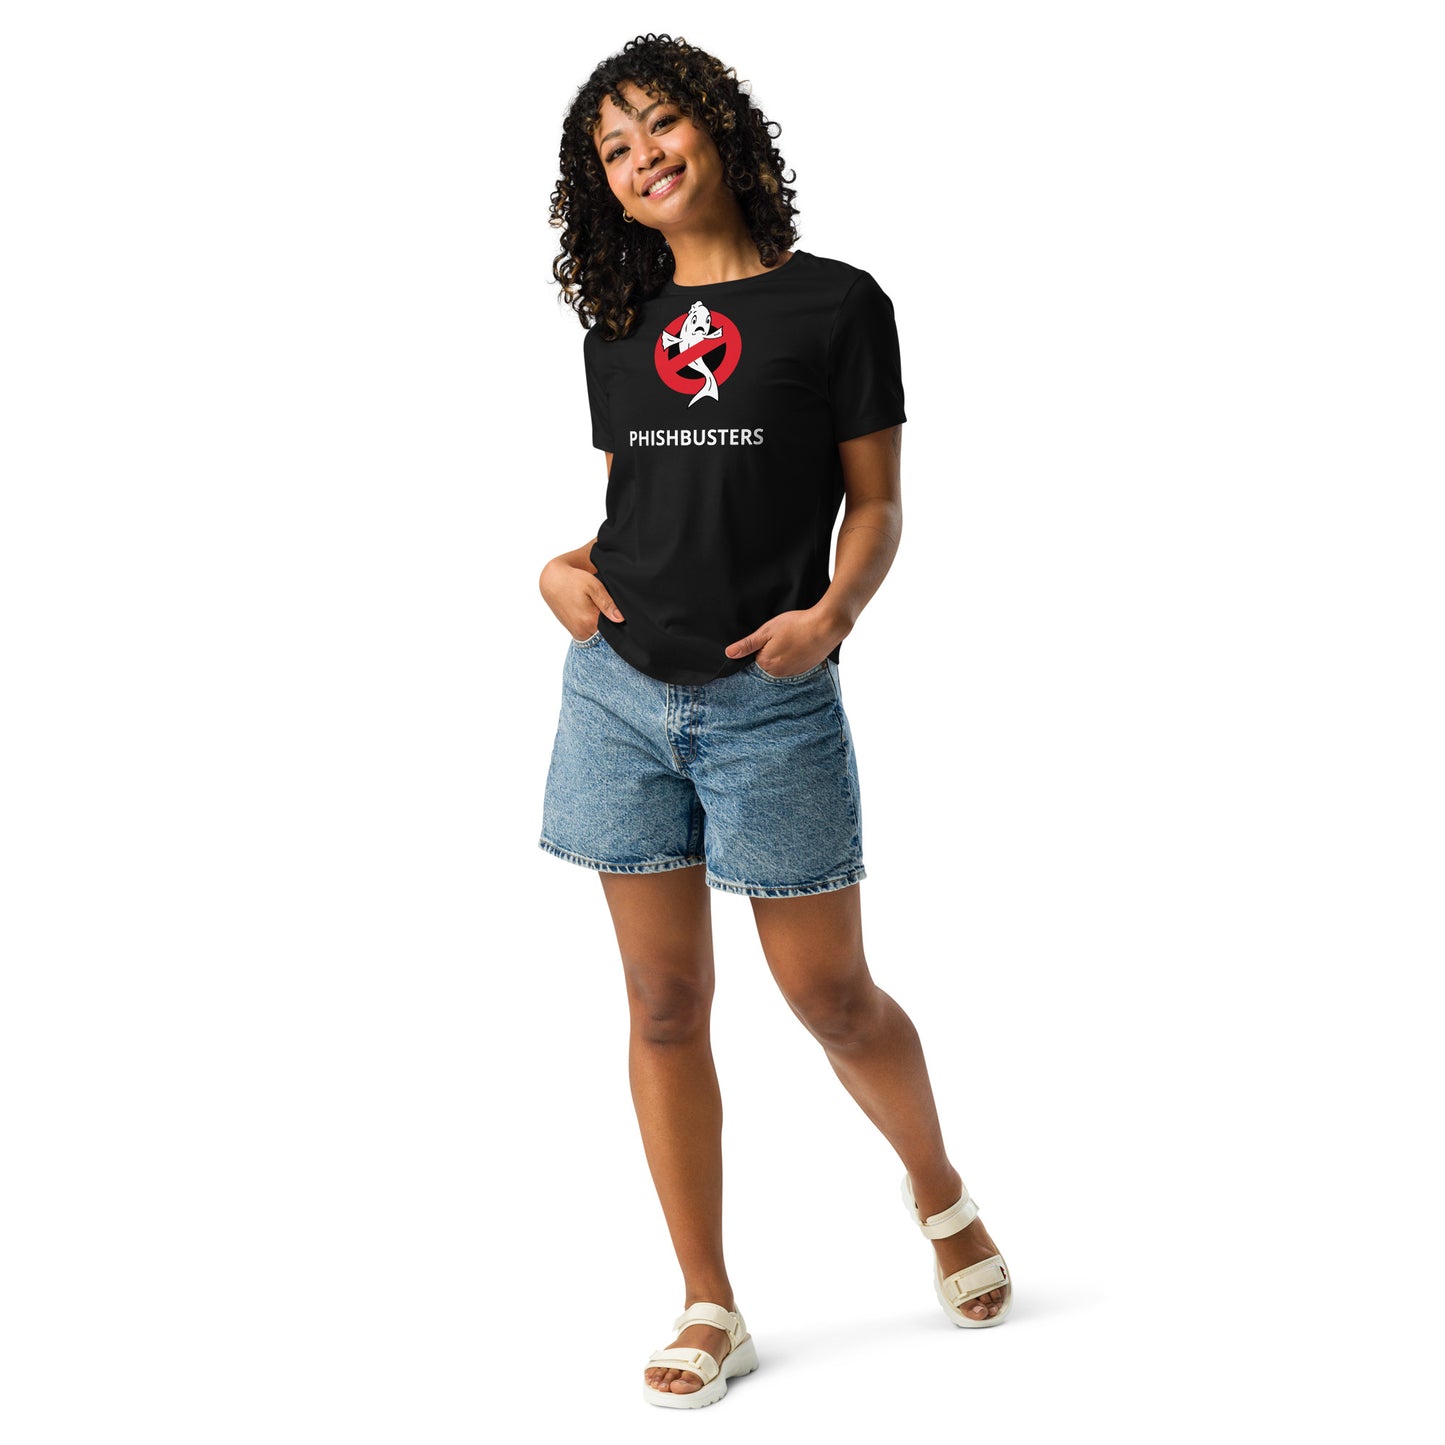 PhishBusters! Women's Relaxed T-Shirt